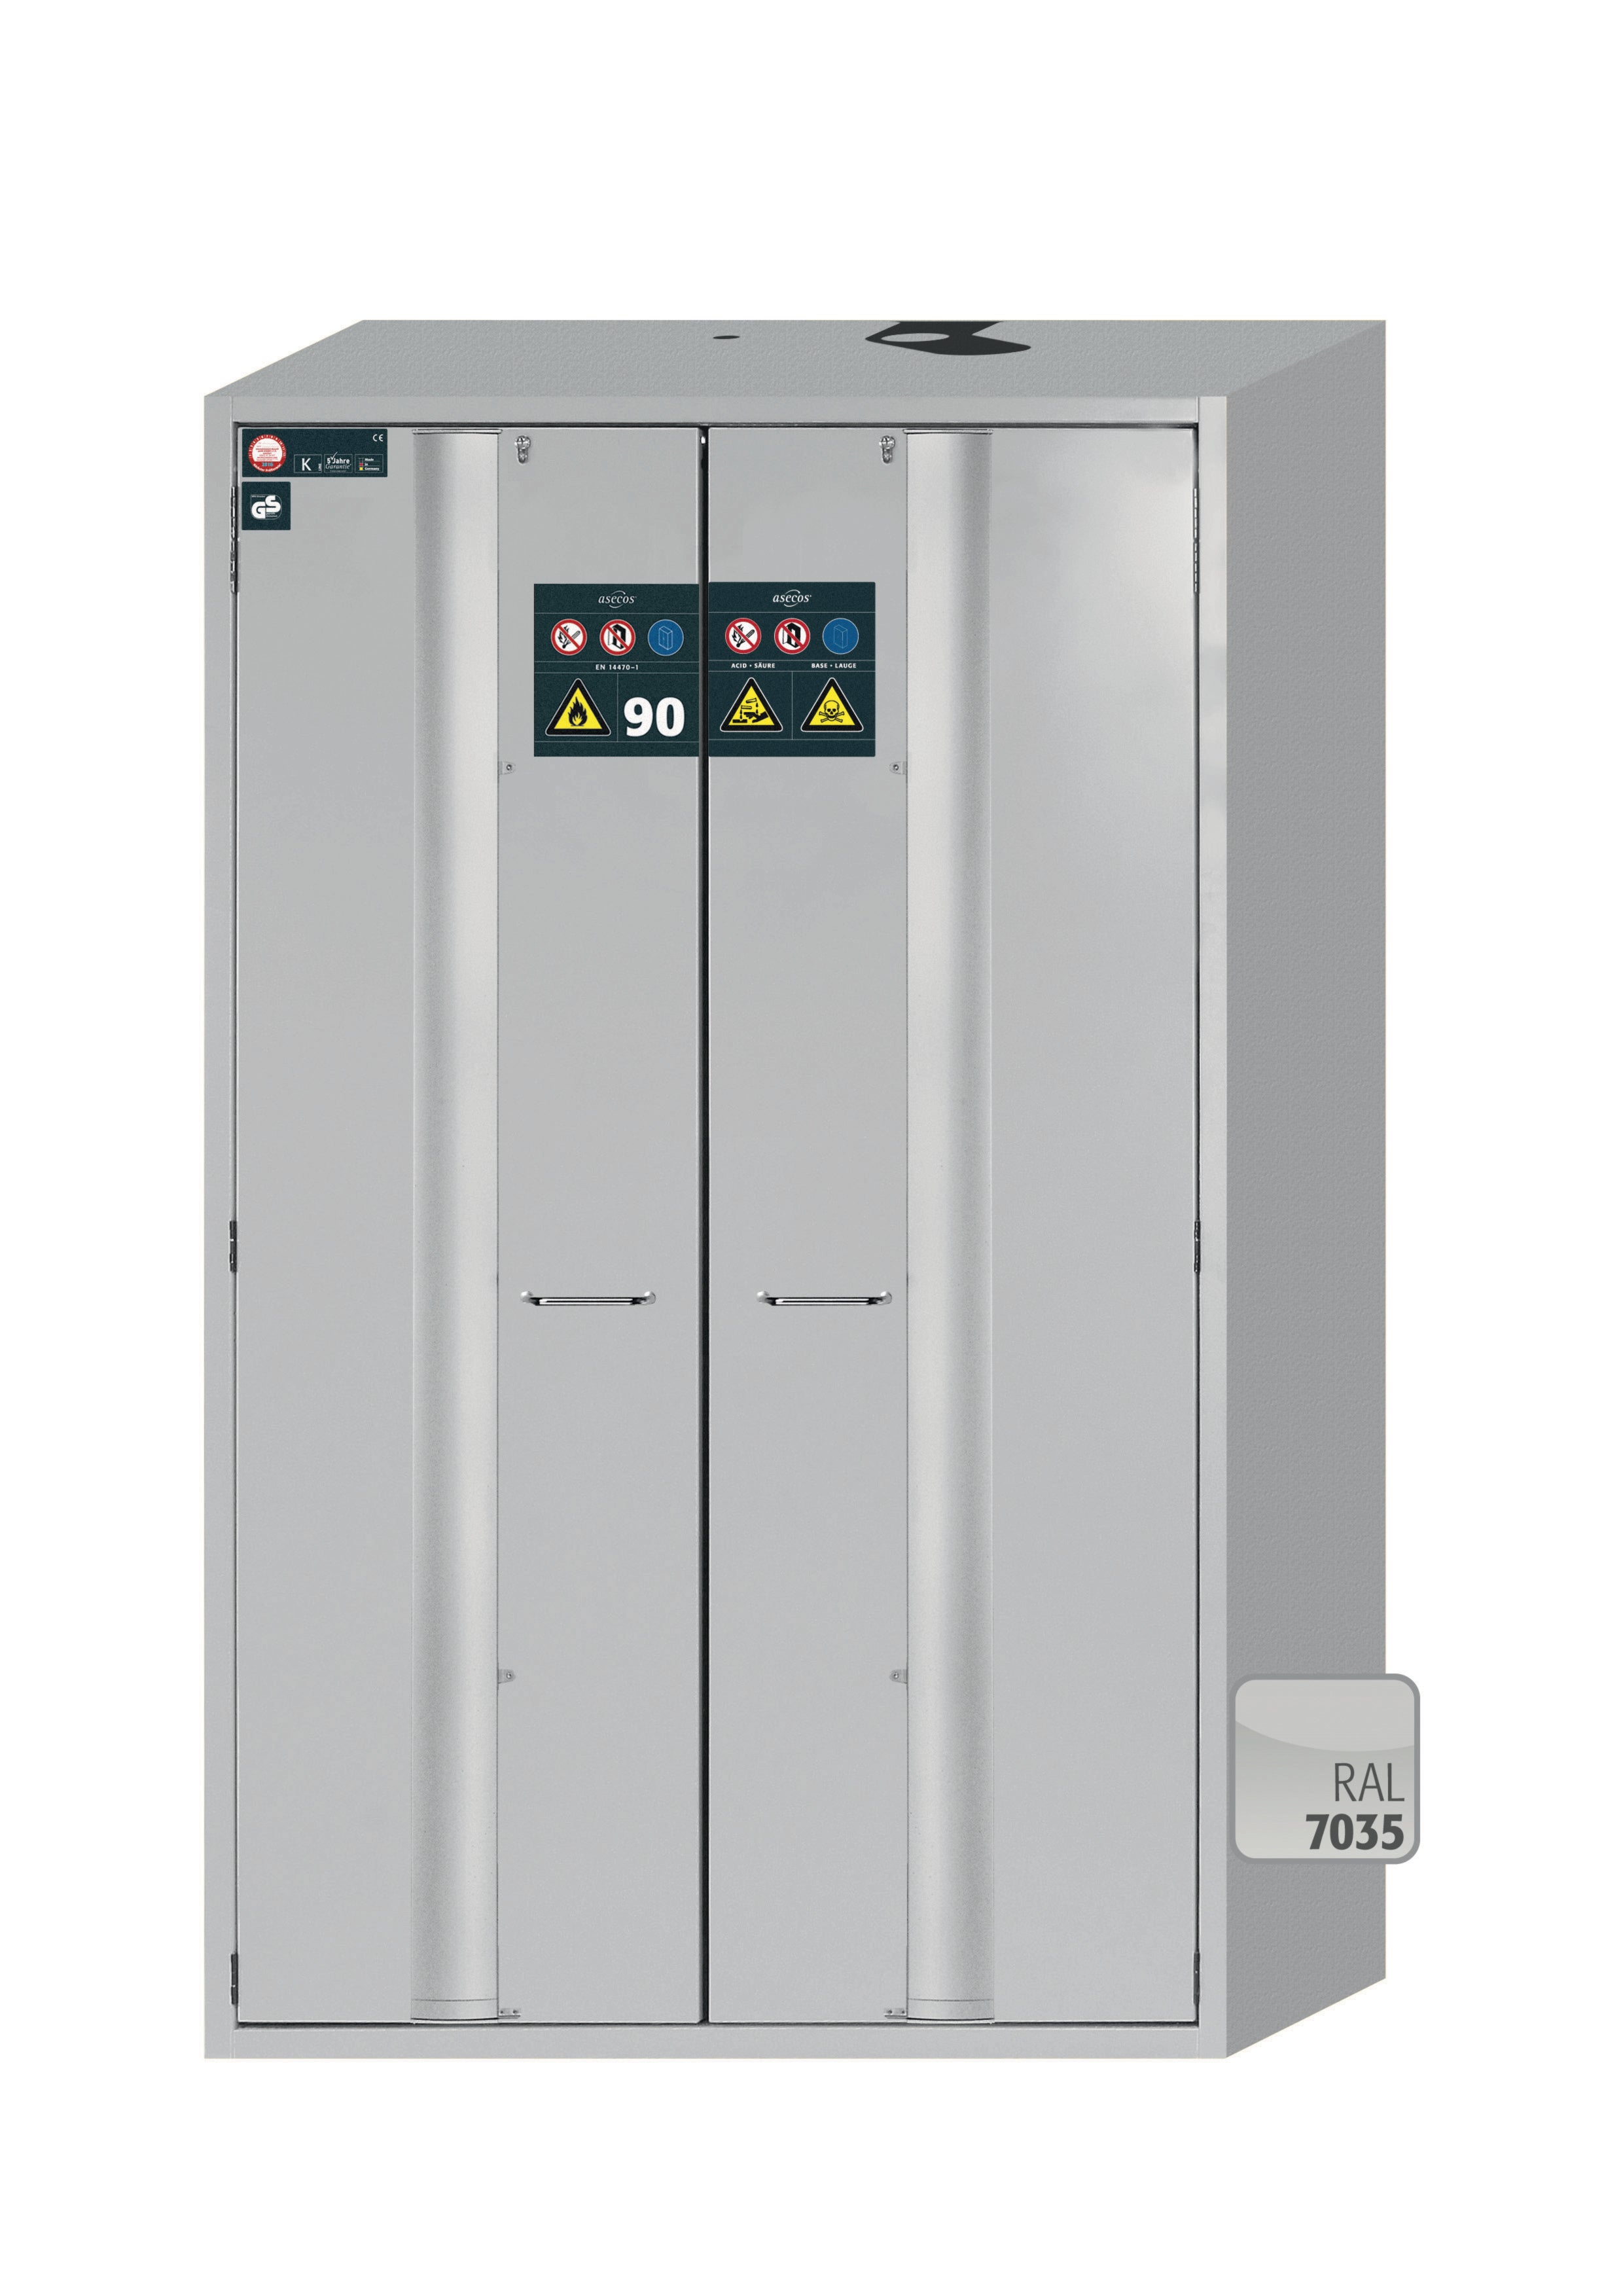 Type 90 safety cabinet S-PHOENIX-90 model S90.196.120.MV.FDAS in light gray RAL 7035 with 6x standard pull-out tray (sheet steel)